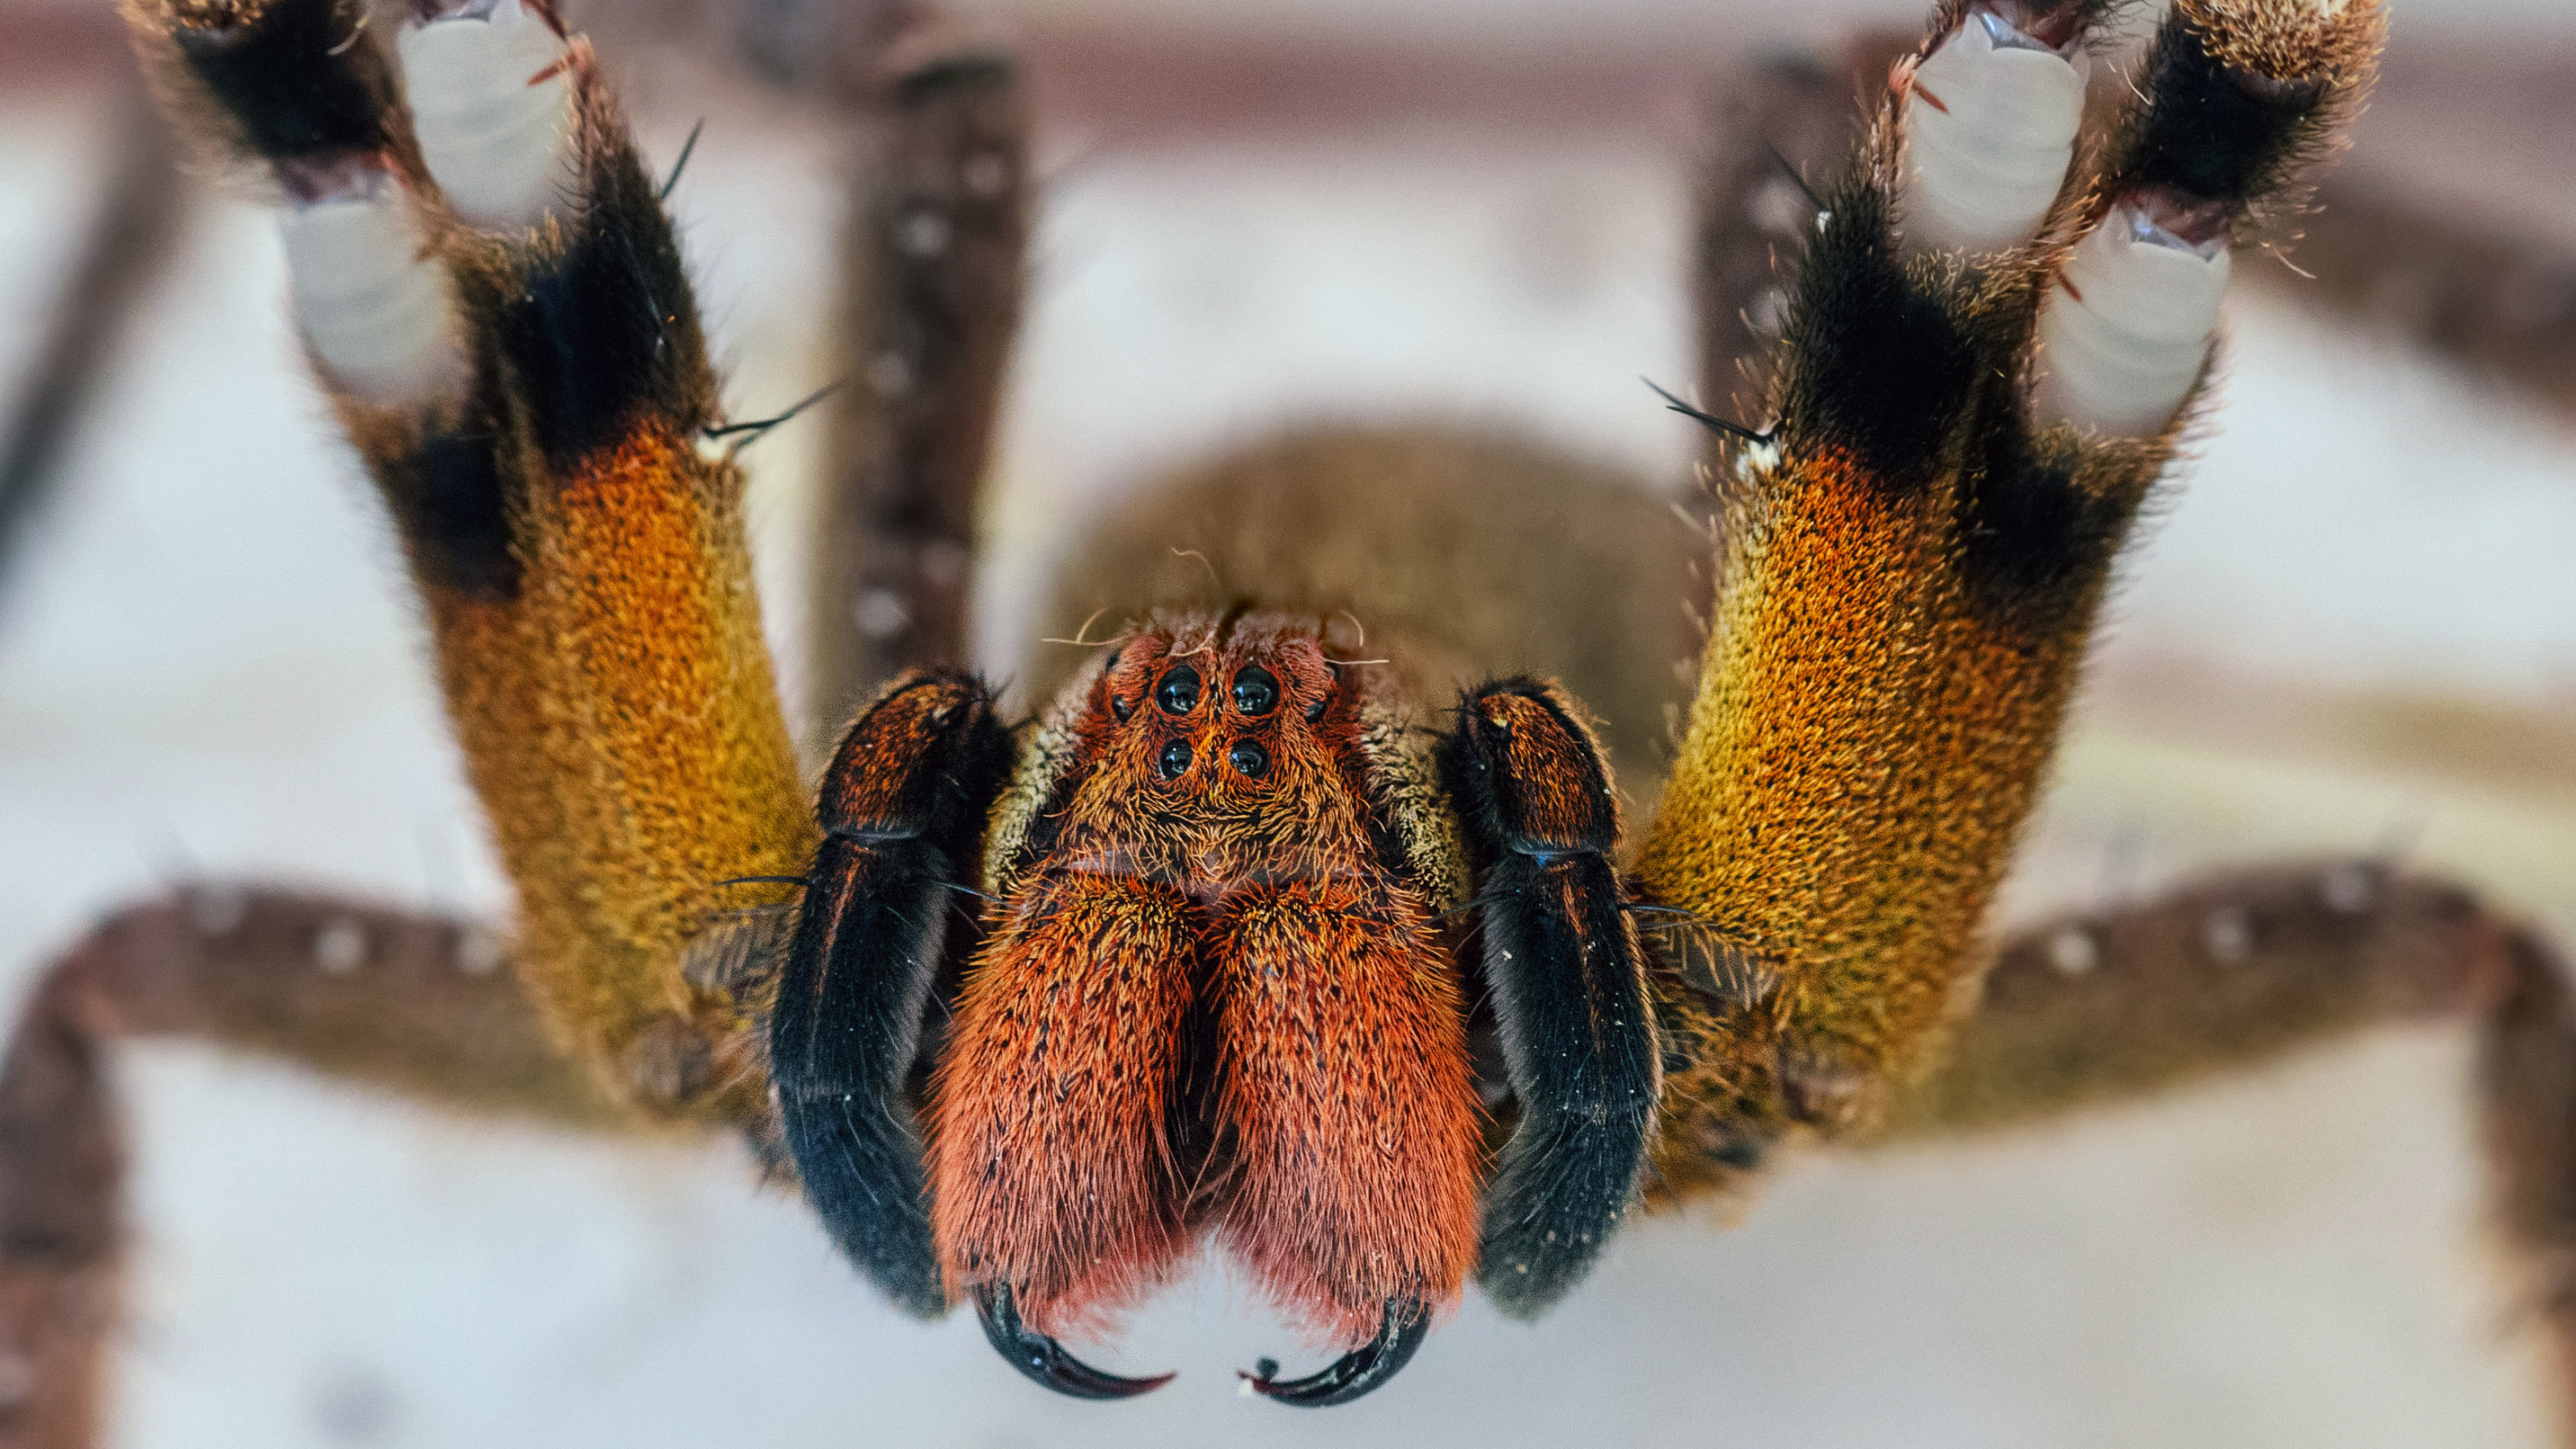 do brazilian wandering spiders attack humans